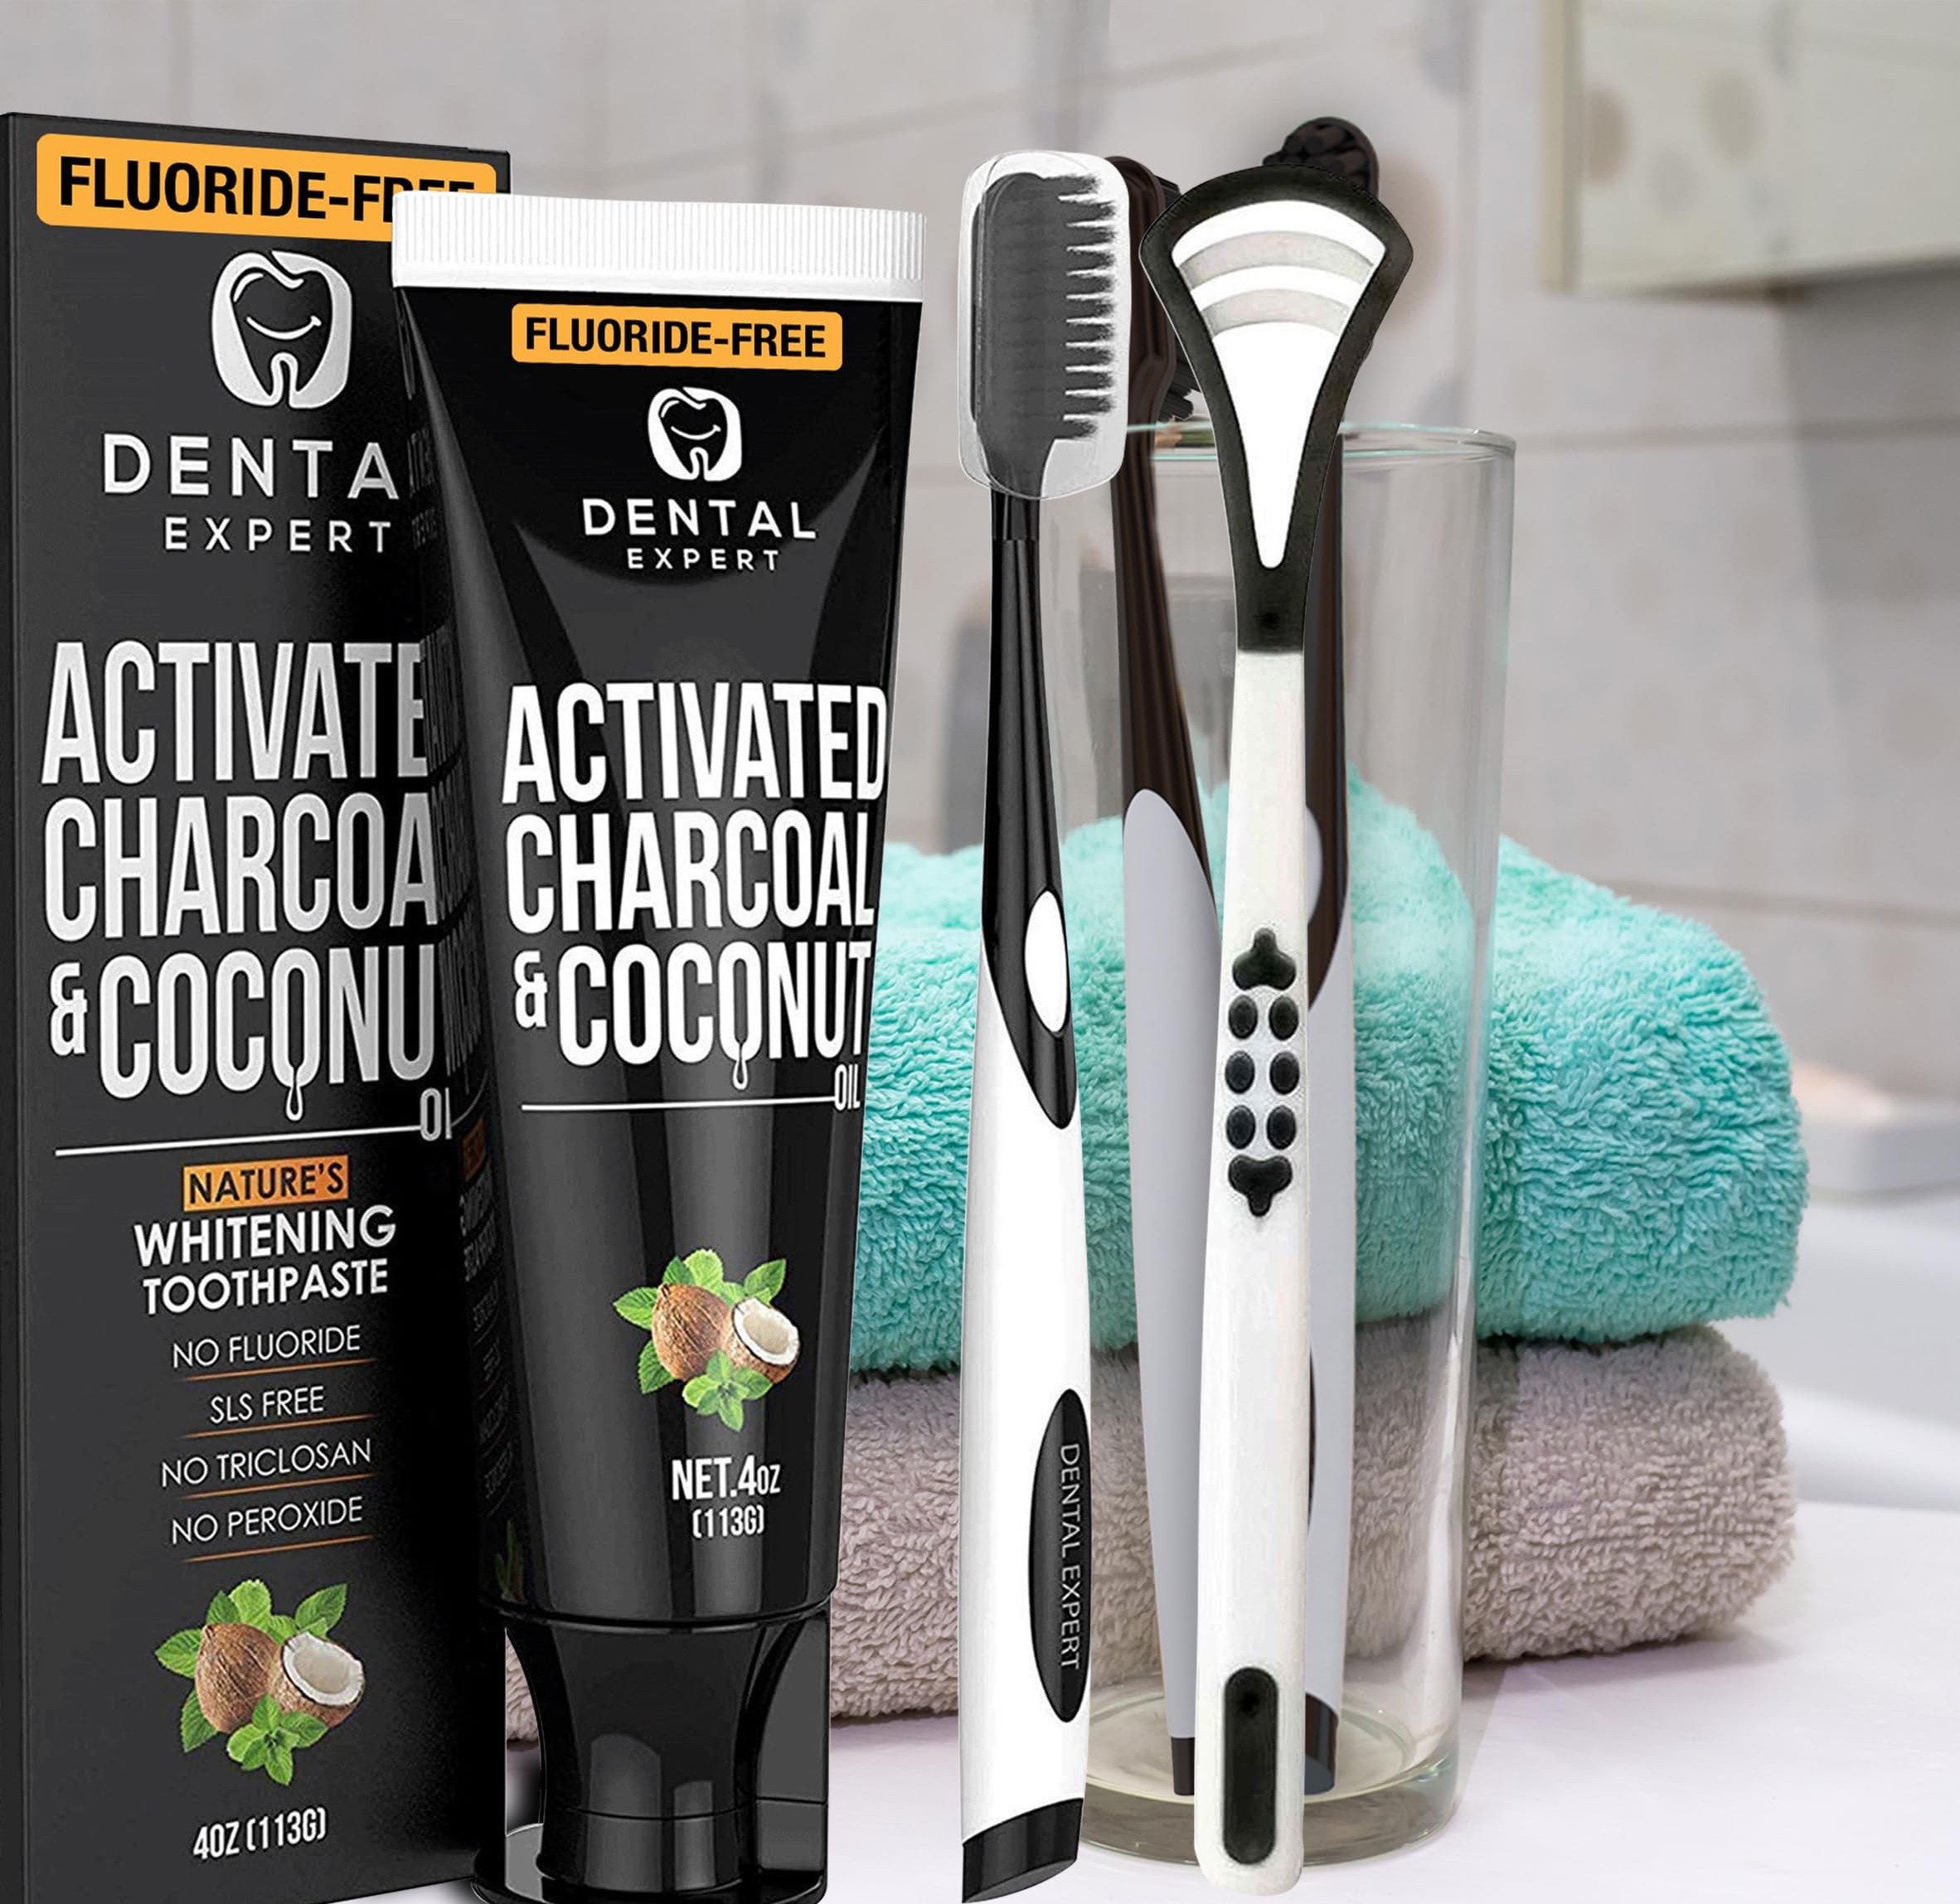 Dental Expert Activated Charcoal Toothpaste